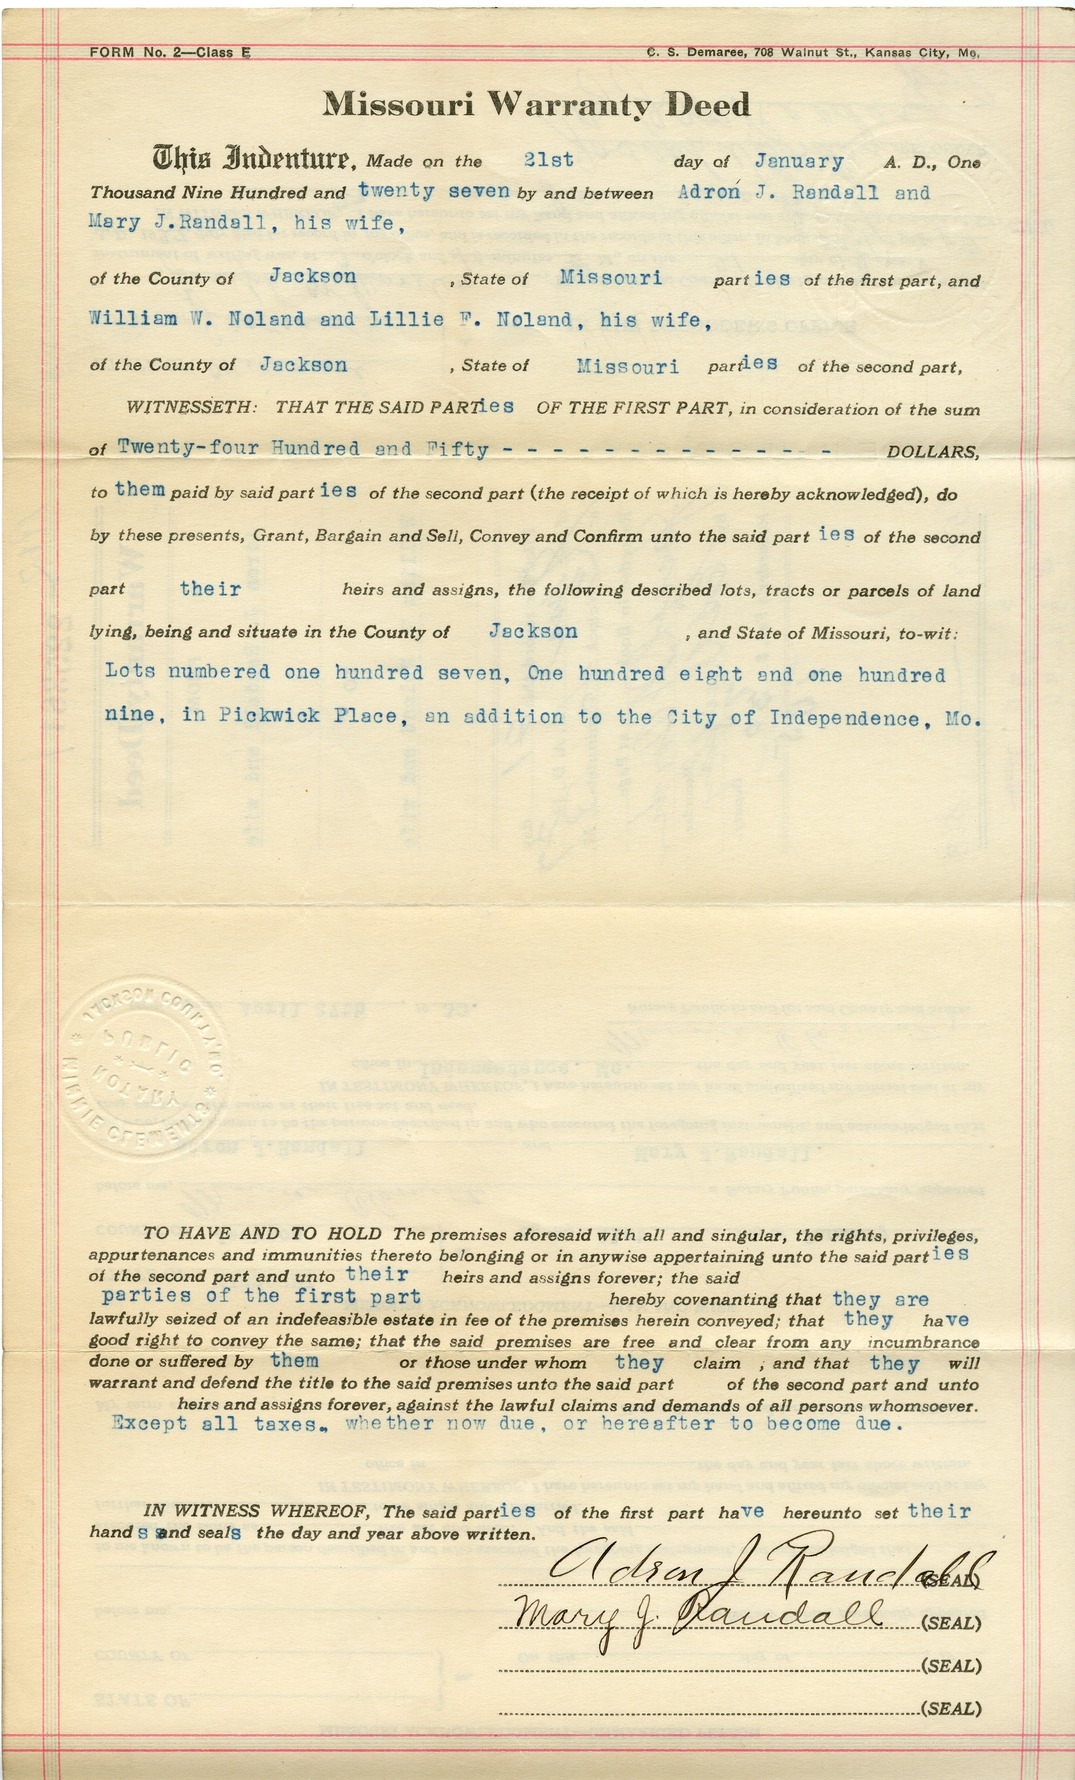 Warranty Deed from Adron J. Randall and Mary J. Randall to William W. Noland and Lillie F. Noland